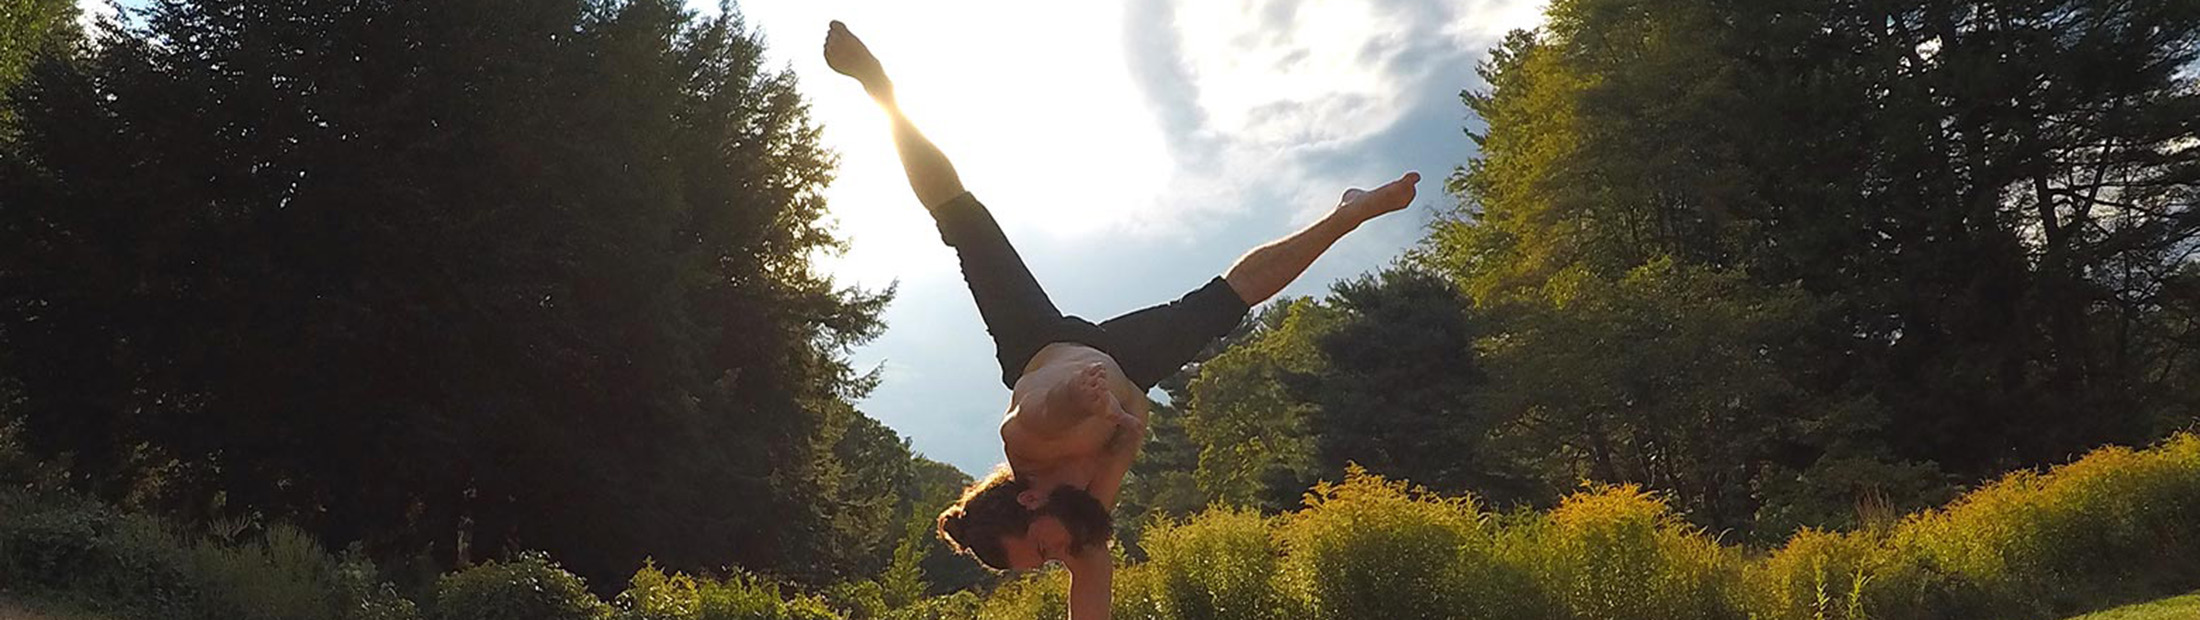 A person doing a one-handed handstand with their legs in a split.